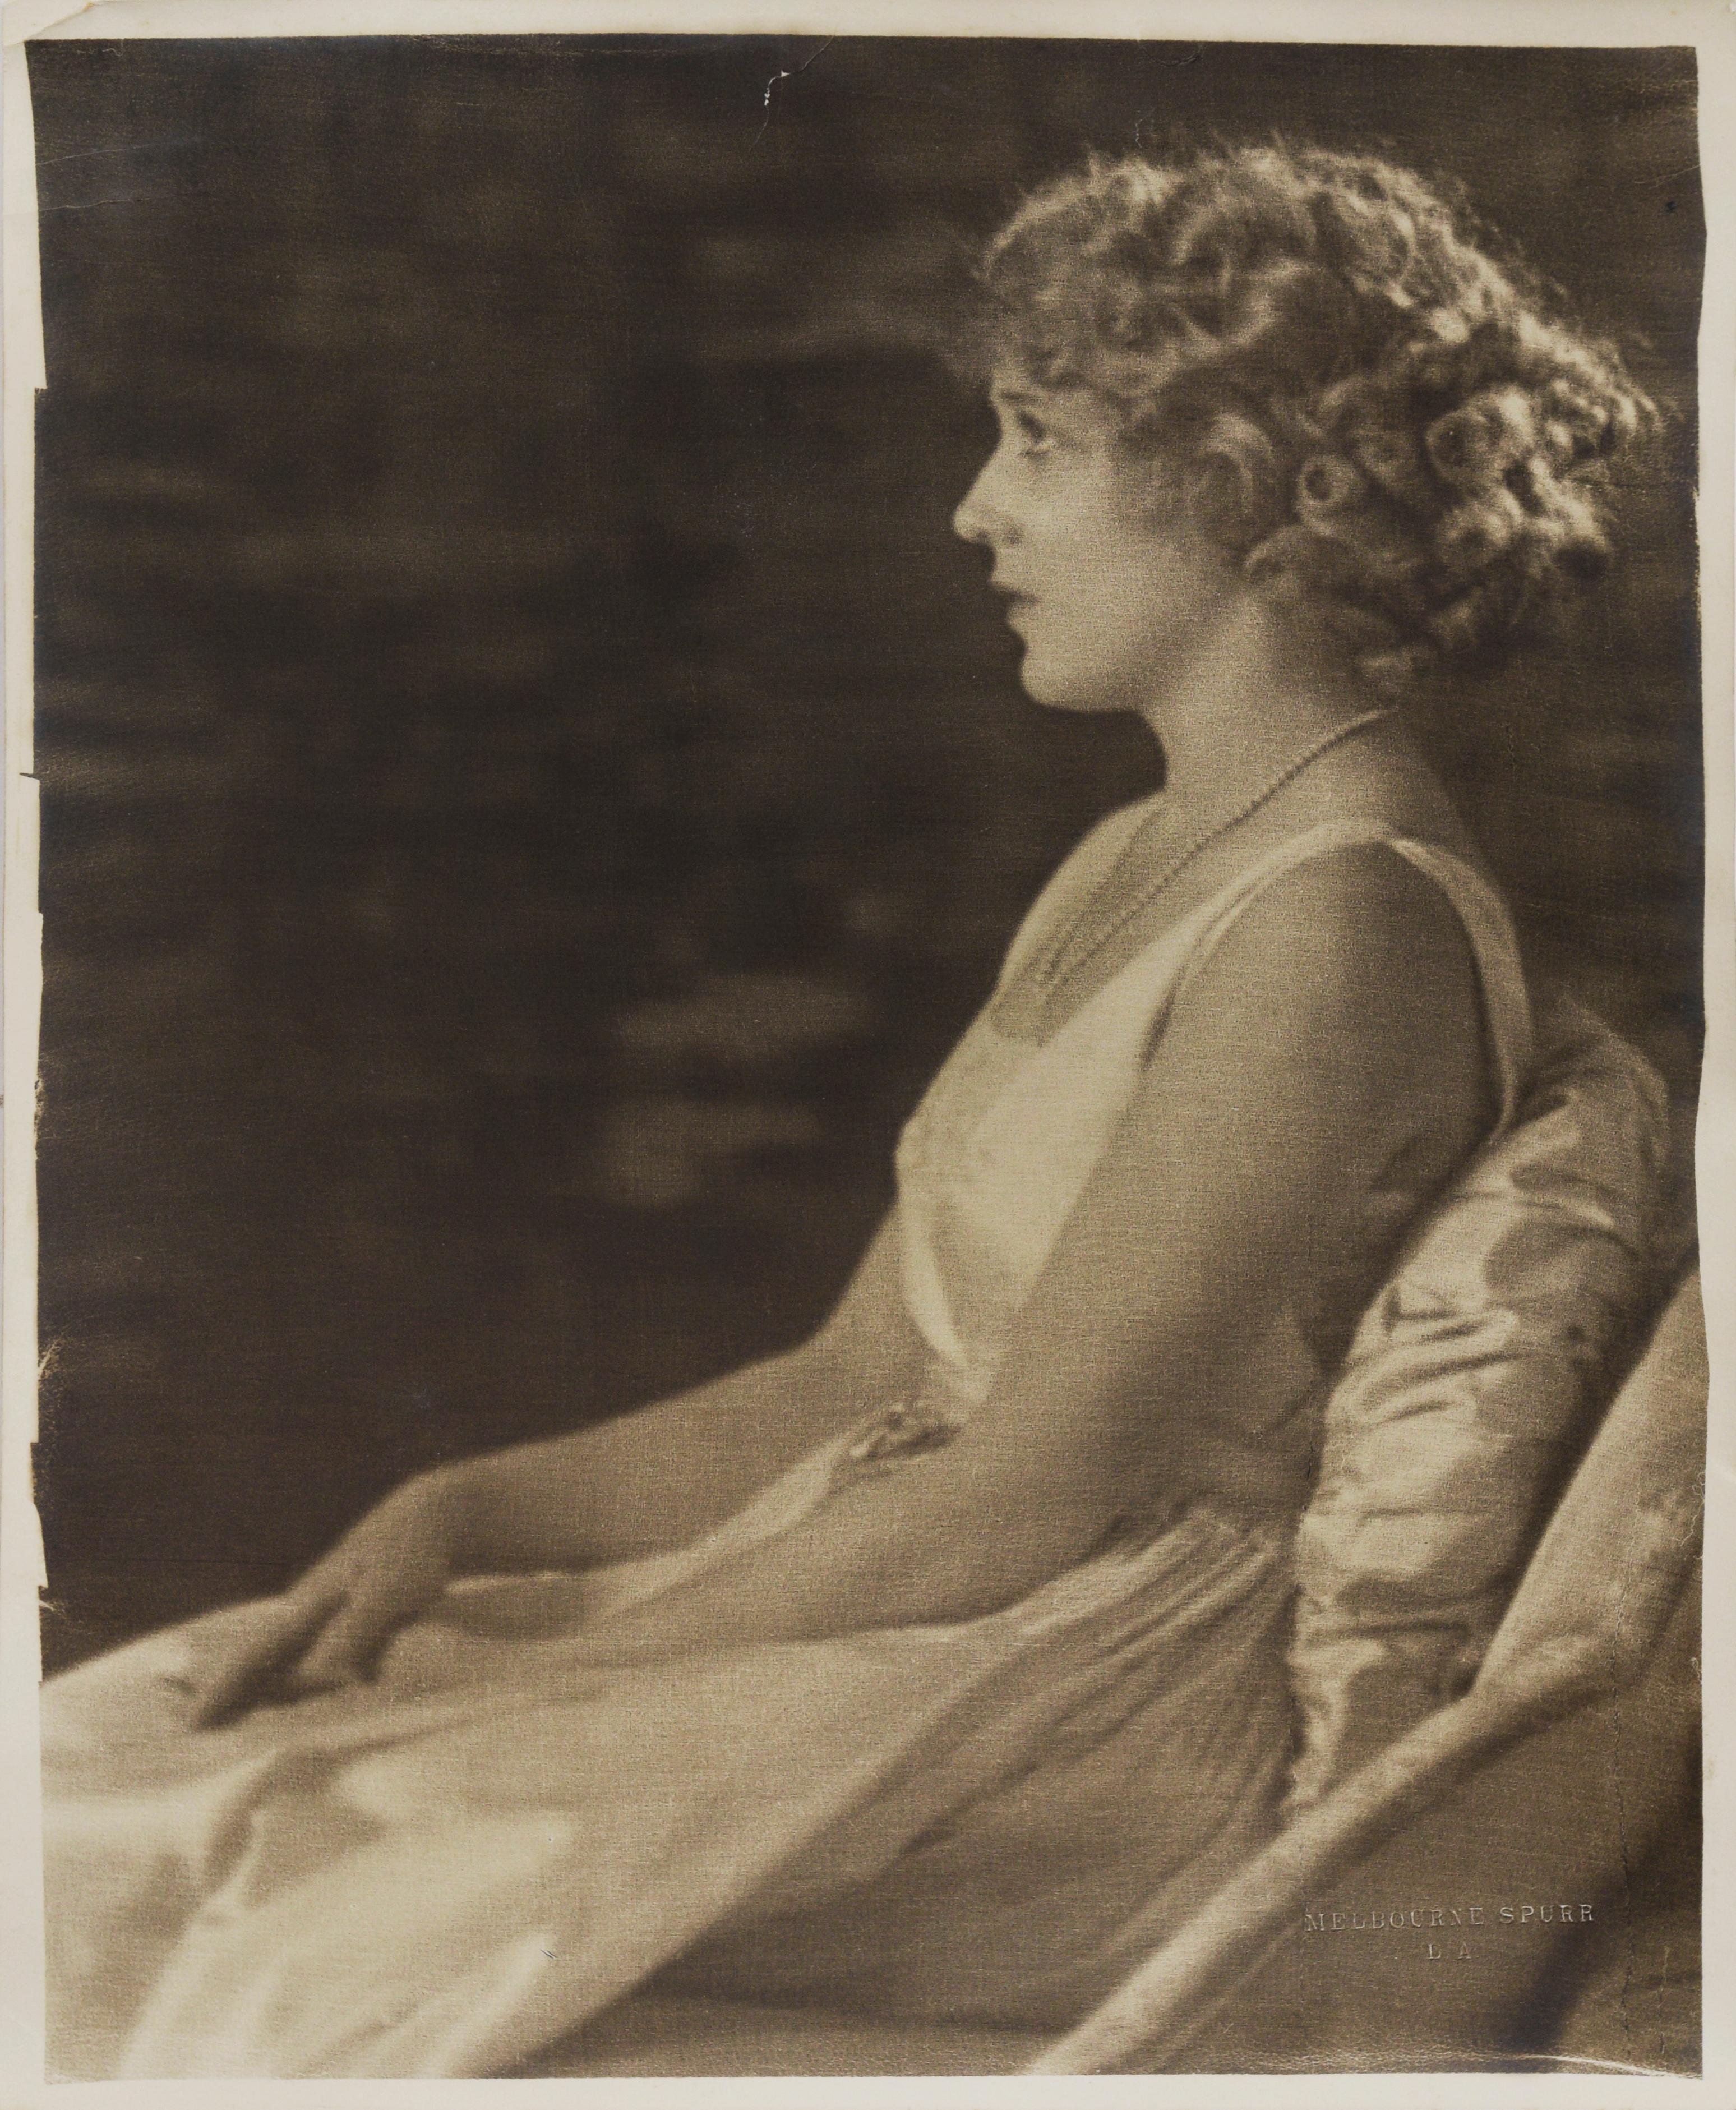 Photograph of Mary Pickford - Melbourne Spurr Photography

Photograph depicting Mary Pickford by Hollywood photographer Melbourne Spurr (Canadian-American, 1892-1979). Mary Pickford is depicted wearing a white sleeveless dress, sitting in a lounge